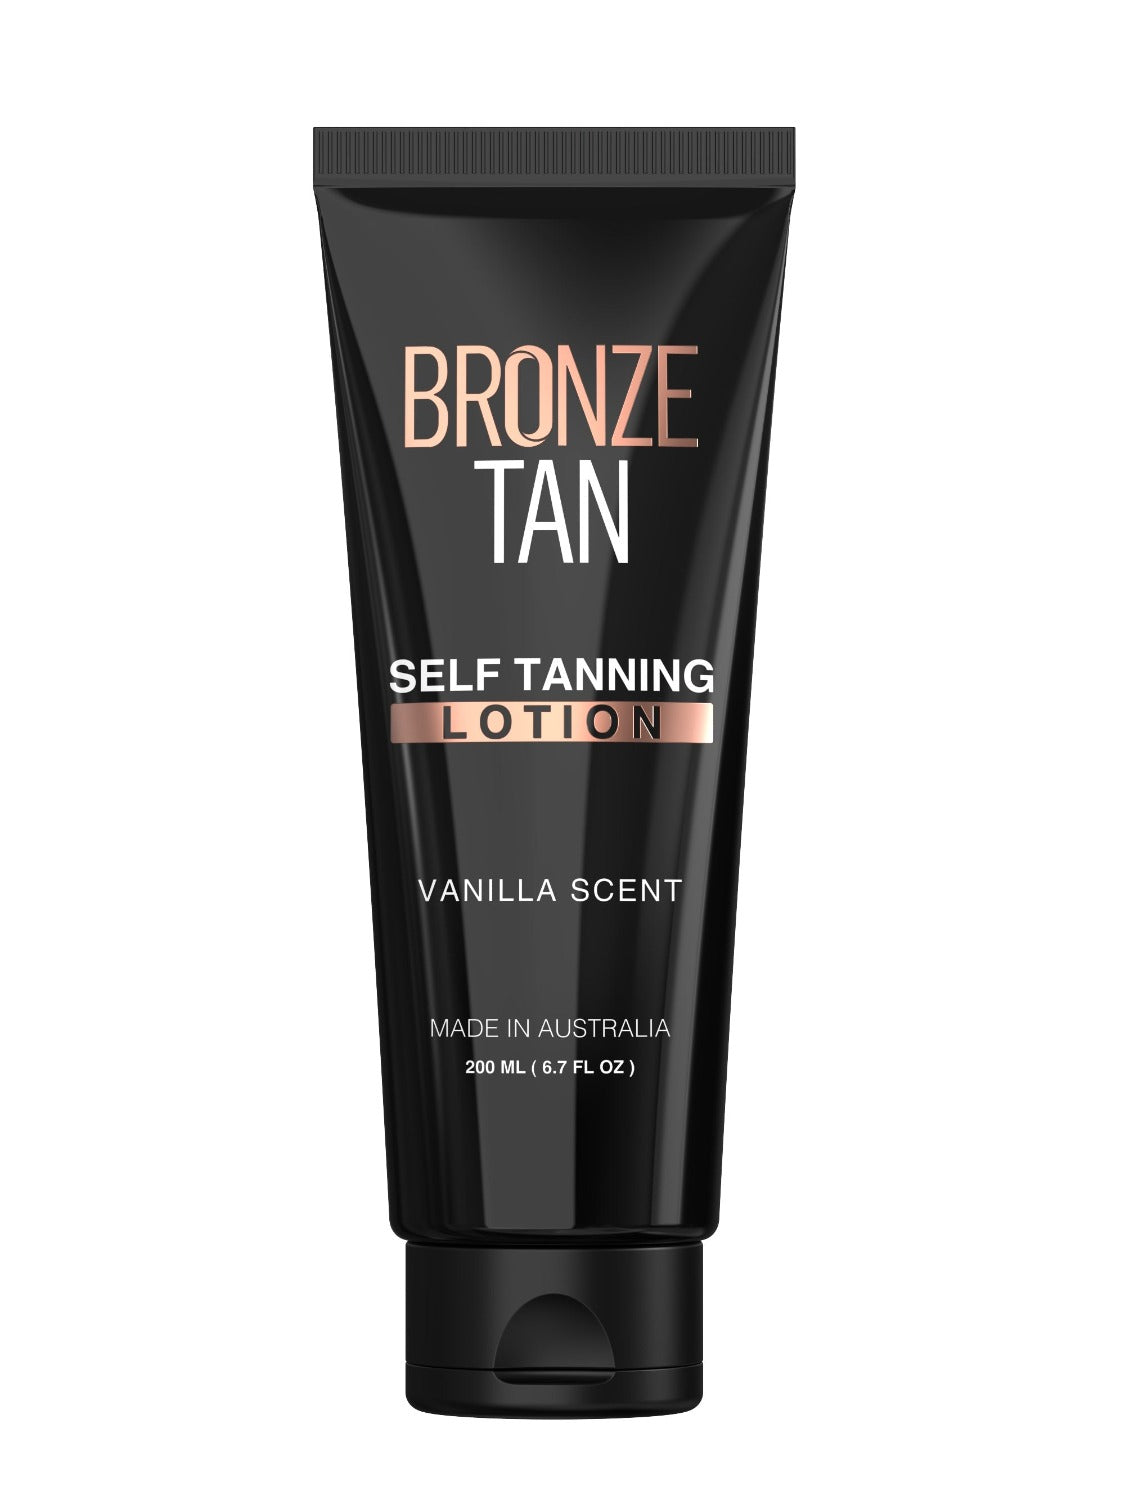 Natural and Organic Self Tanning Lotion | Self Tanning Mitts | Bronze Tan | Self Tanning Products | Self Tanner | Sunless Tanning